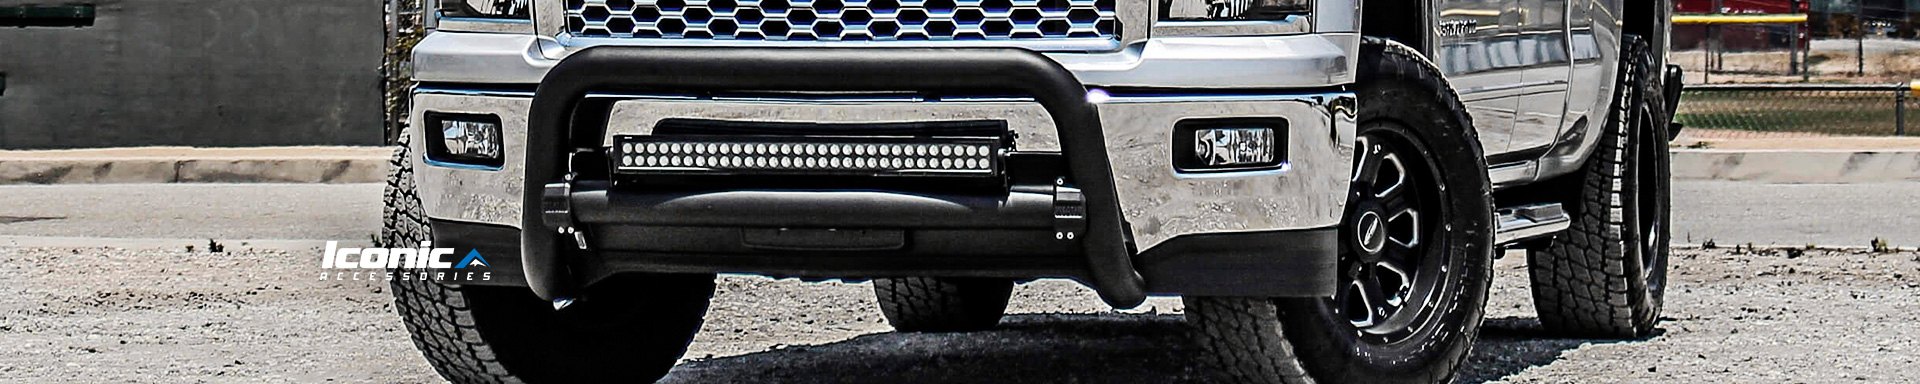 Iconic Accessories Off-Road Bumpers